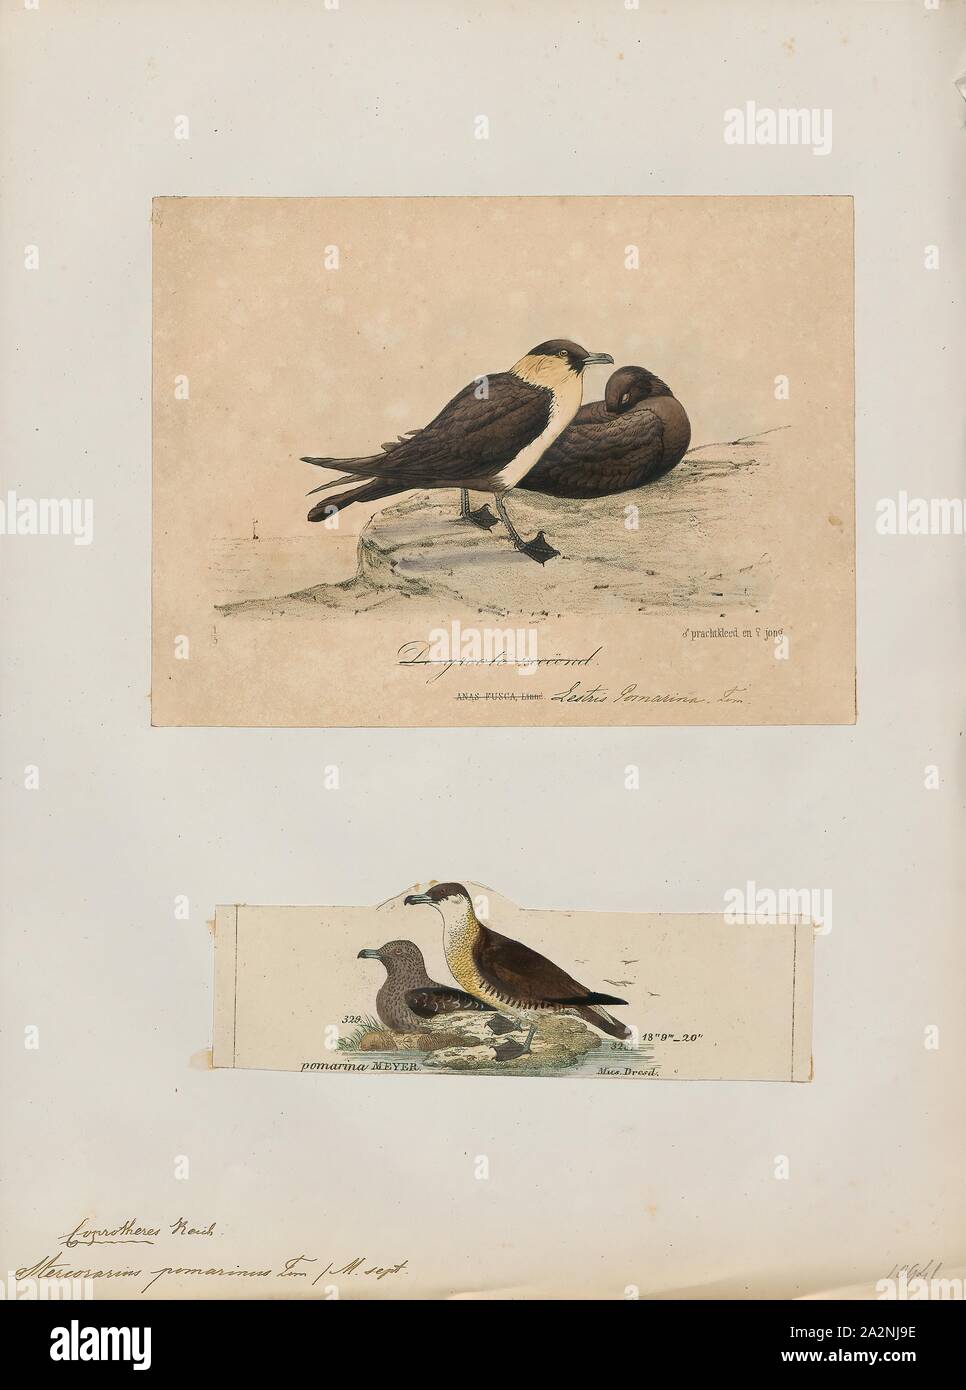 Stercorarius pomarinus, Print, The pomarine jaeger (Stercorarius pomarinus), pomarine skua, or pomatorhine skua, is a seabird in the skua family Stercorariidae. It is a migrant, wintering at sea in the tropical oceans., 1700-1880 Stock Photo